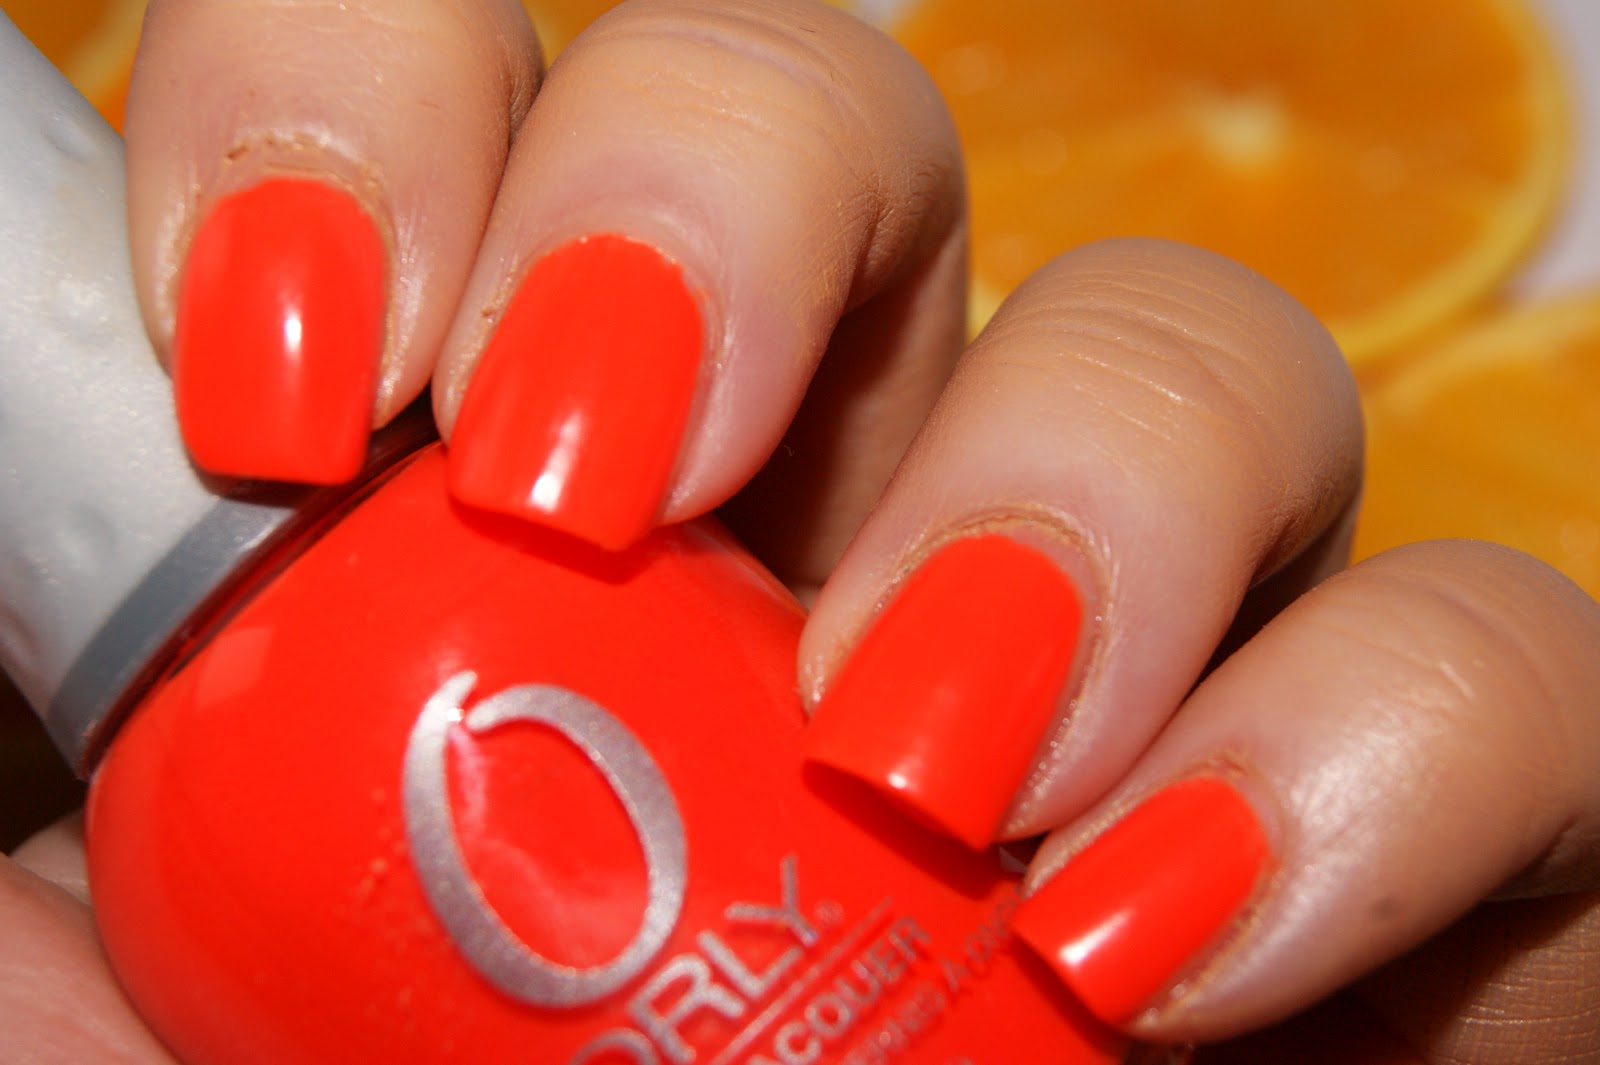 10. Orly Nail Lacquer in "Orange Punch" - wide 3